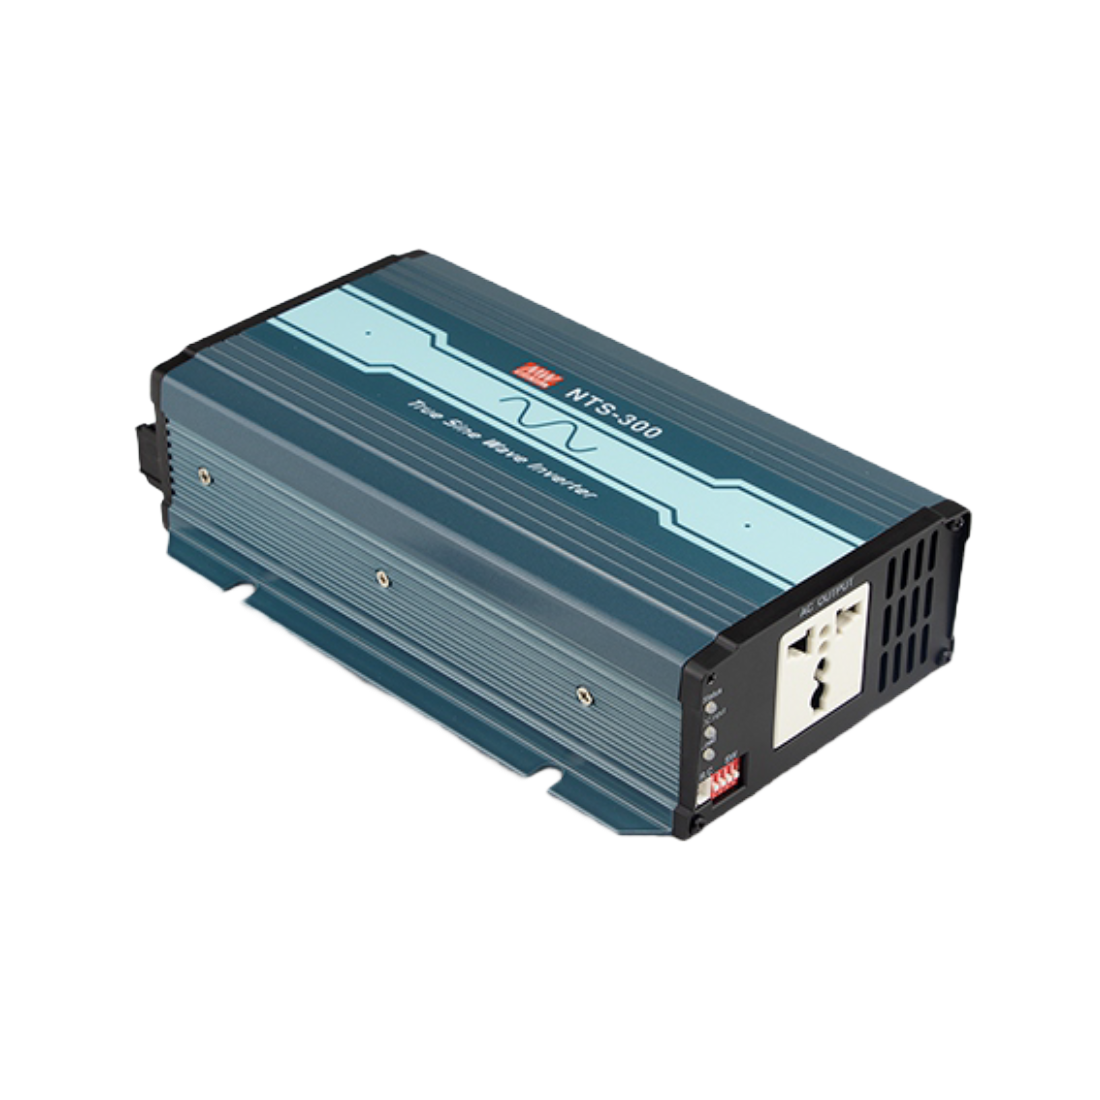 Meanwell NTS-300-212UN 12V Inverter